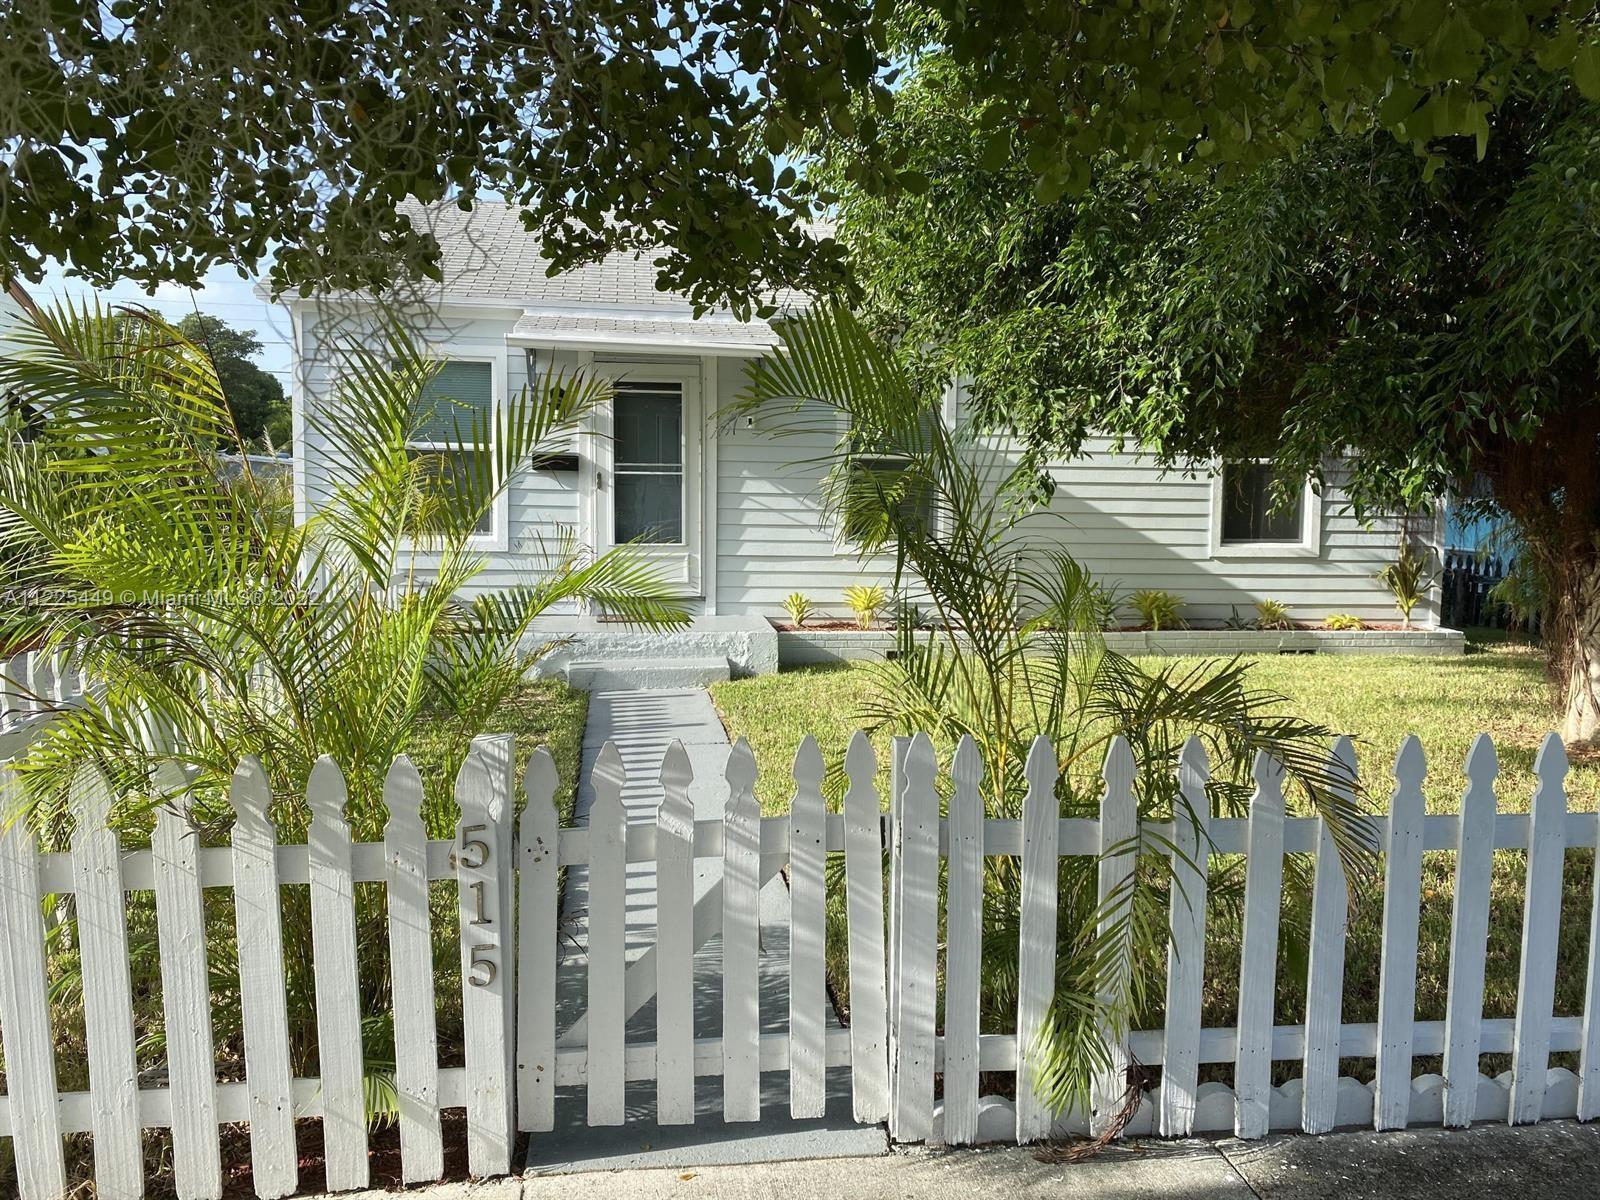 GREAT INVESTMENT - Completely remodeled 3 bedroom 1 bath single family KEY WEST style home in West P